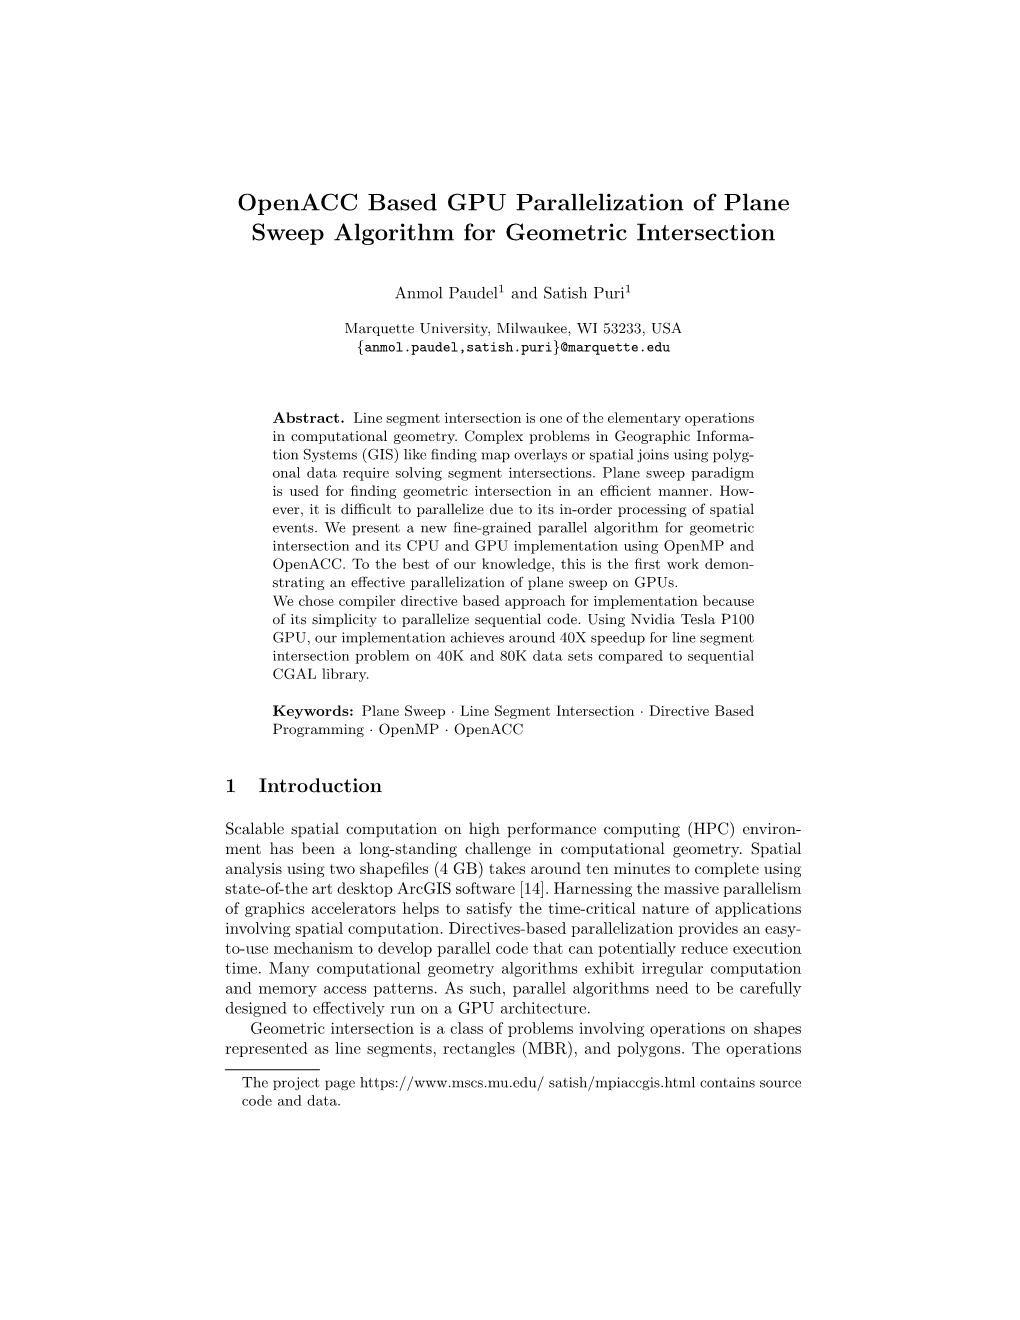 Openacc Based GPU Parallelization of Plane Sweep Algorithm for Geometric Intersection